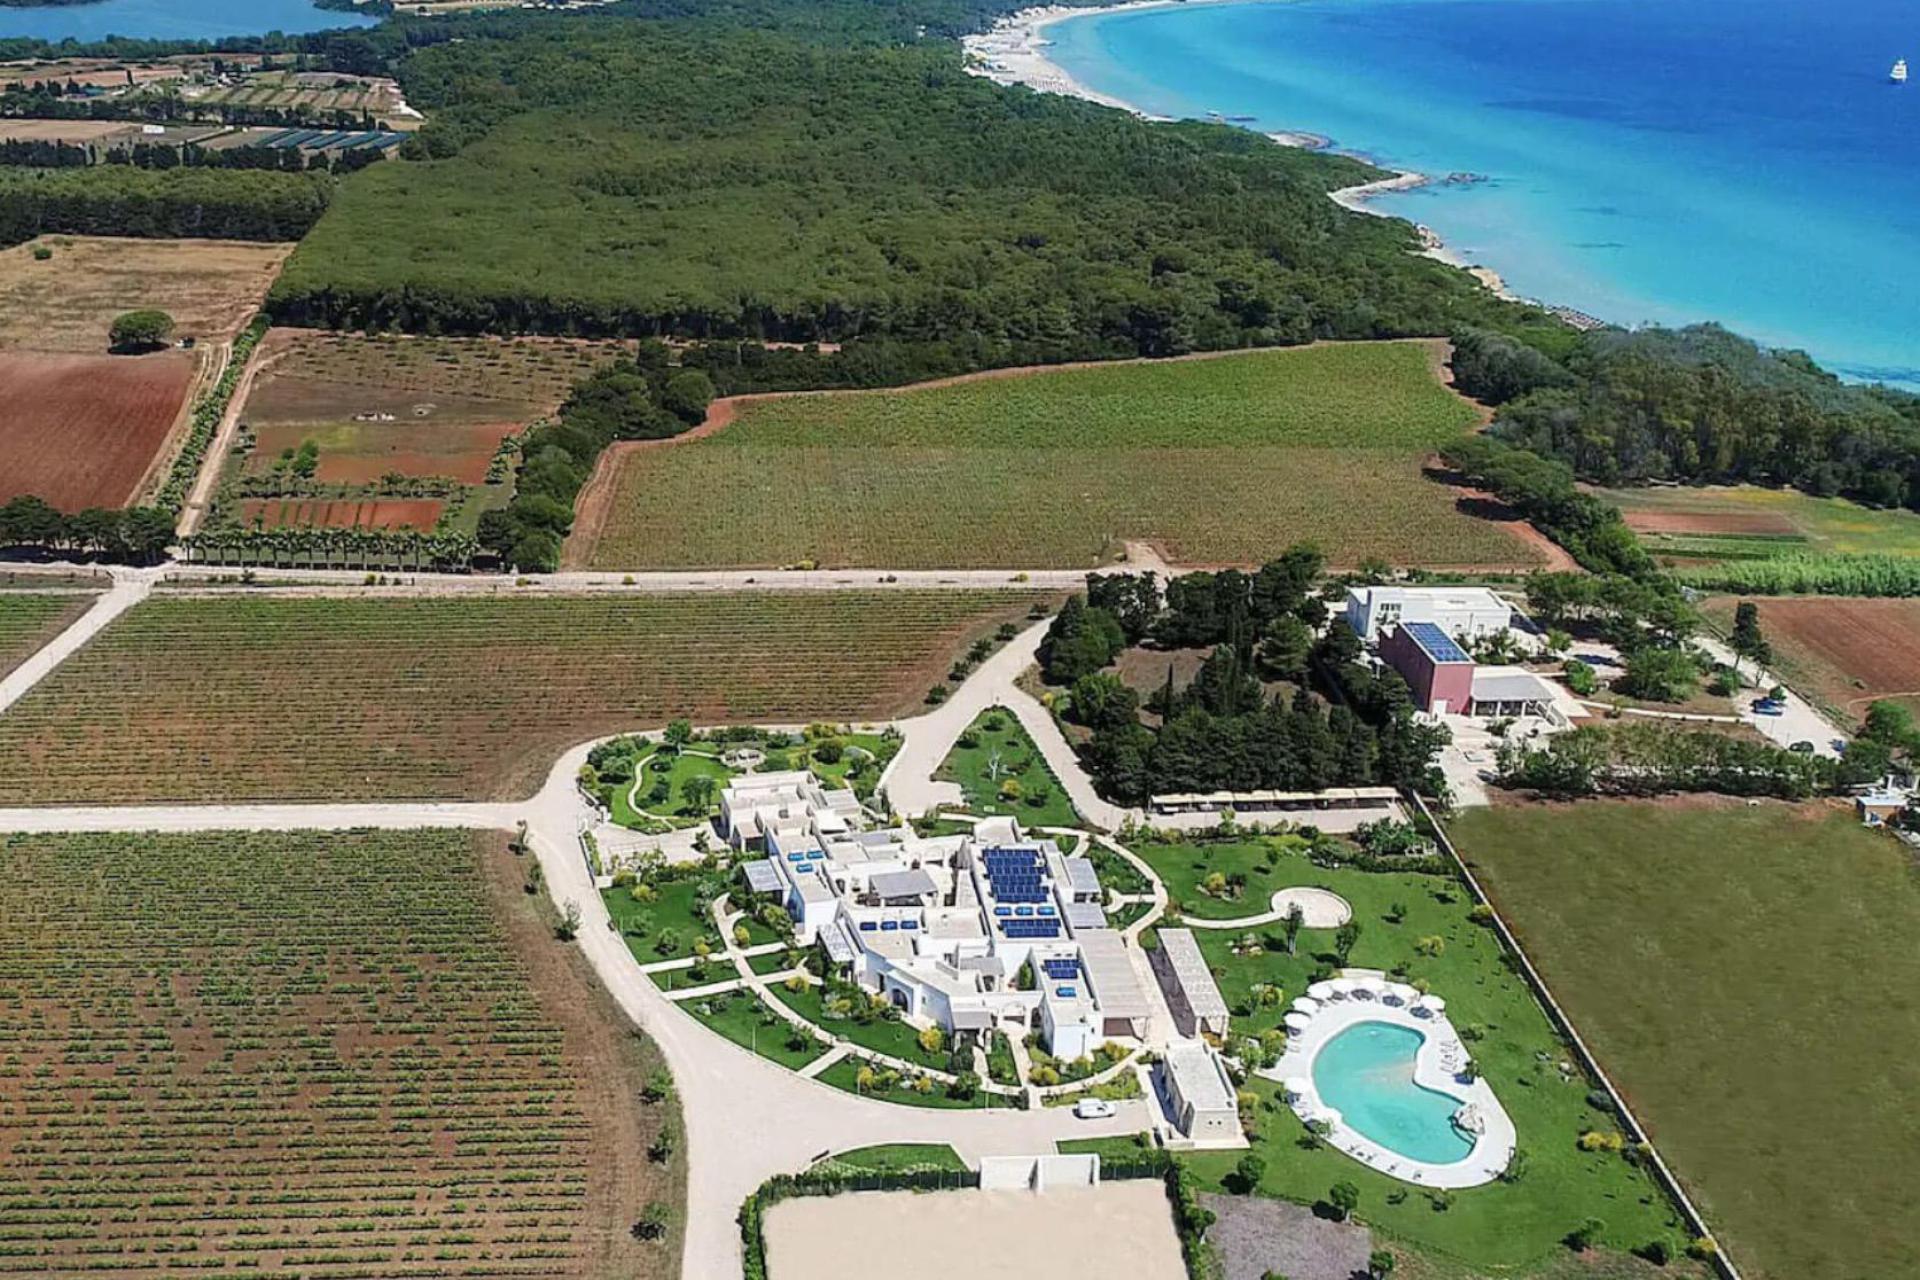 Agriturismo Puglia Luxury agriturismo at walking distance from the beach